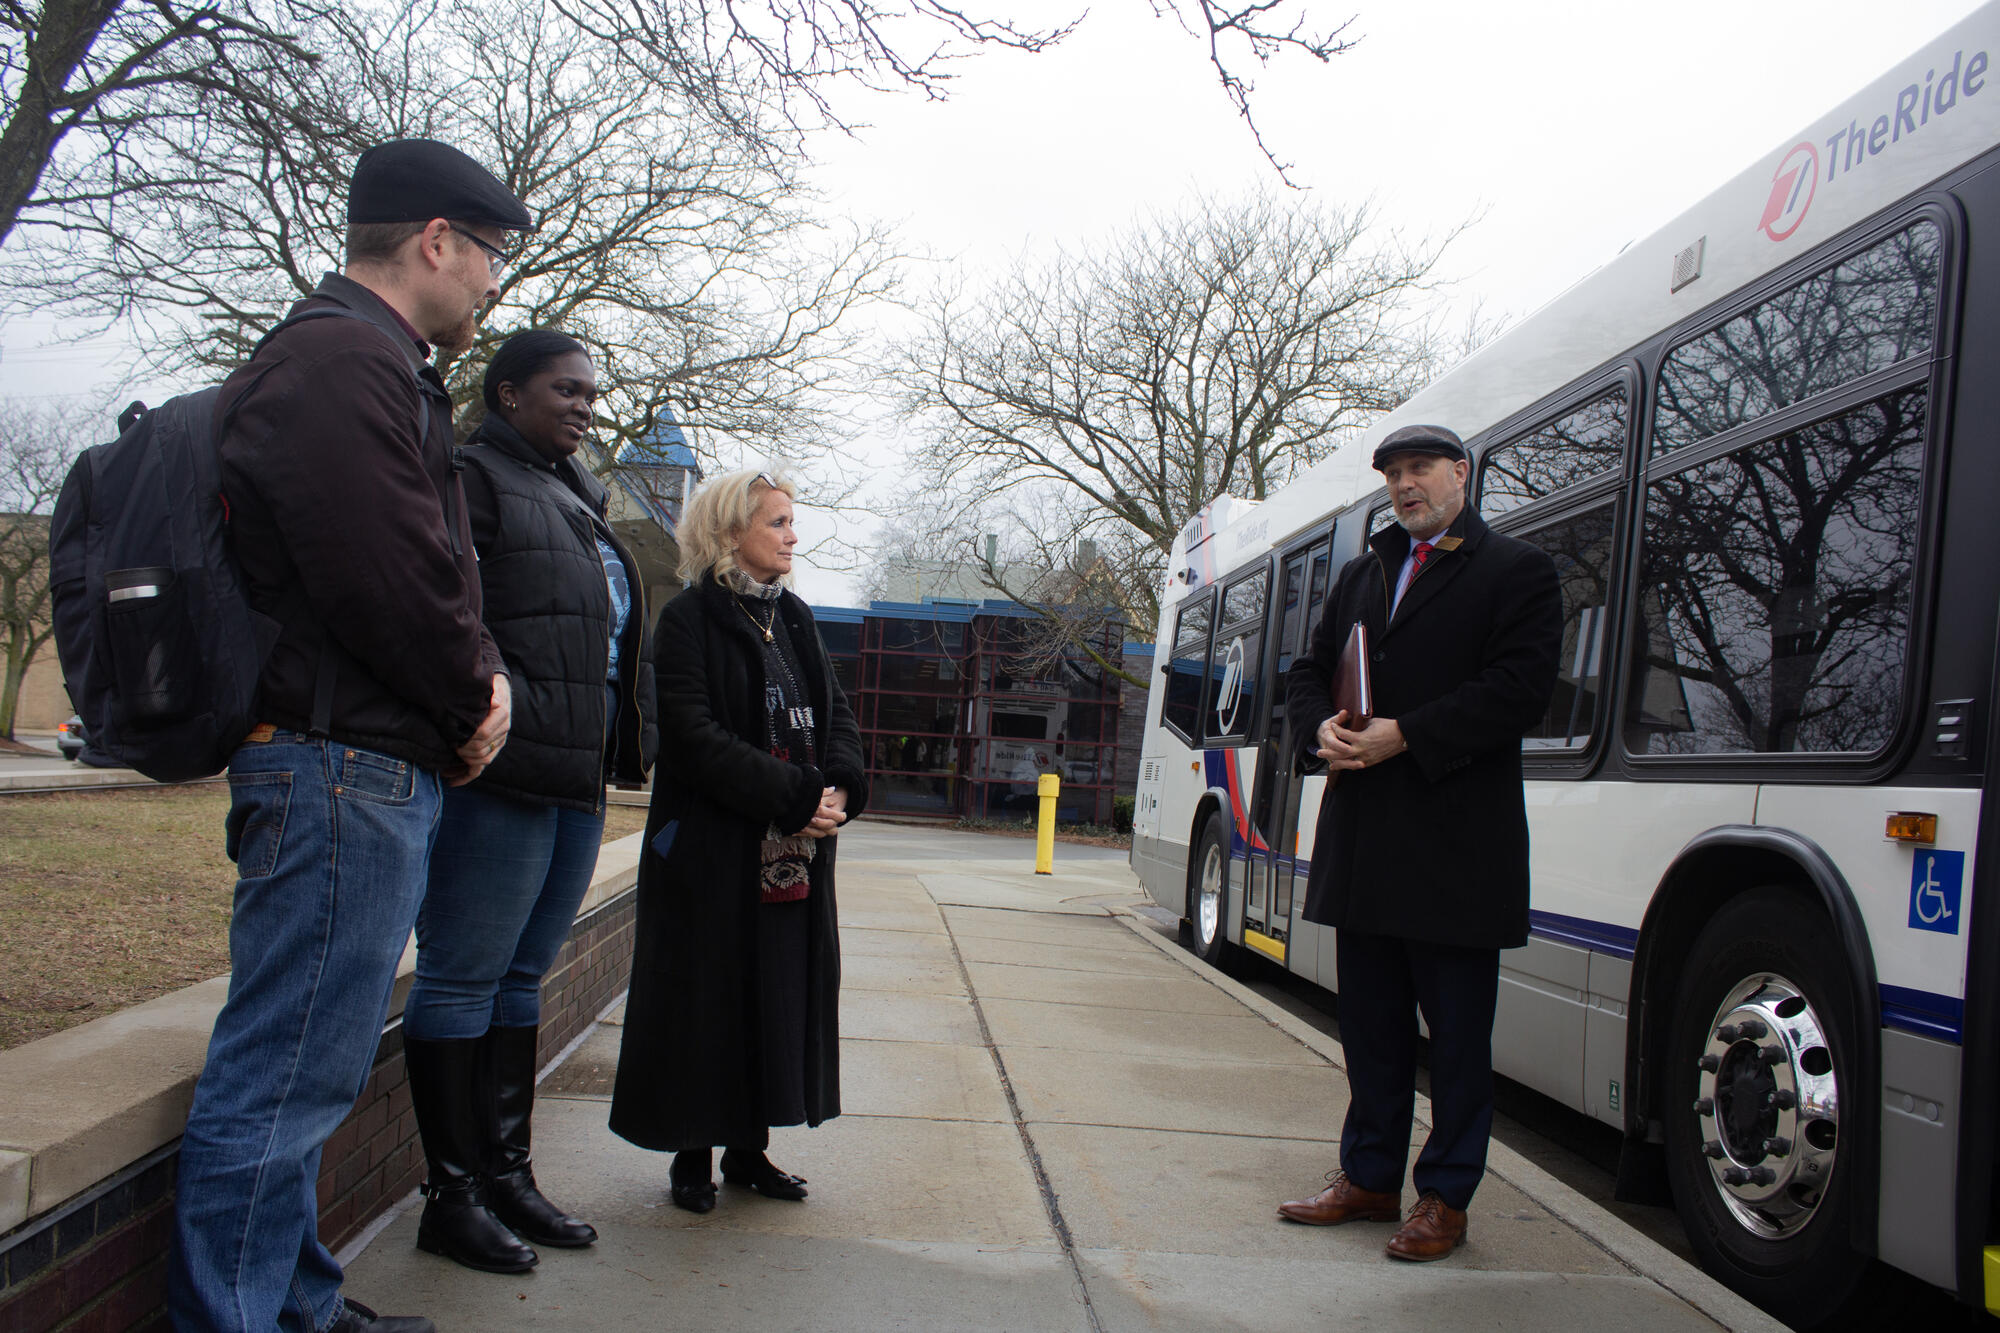 CEO Matt Carpenter speaks with Congresswoman Dingell, Mayor Brown of Ypsilanti and TheRide Board Member Jesse Miller about the Ypsilanti Transit Center project.